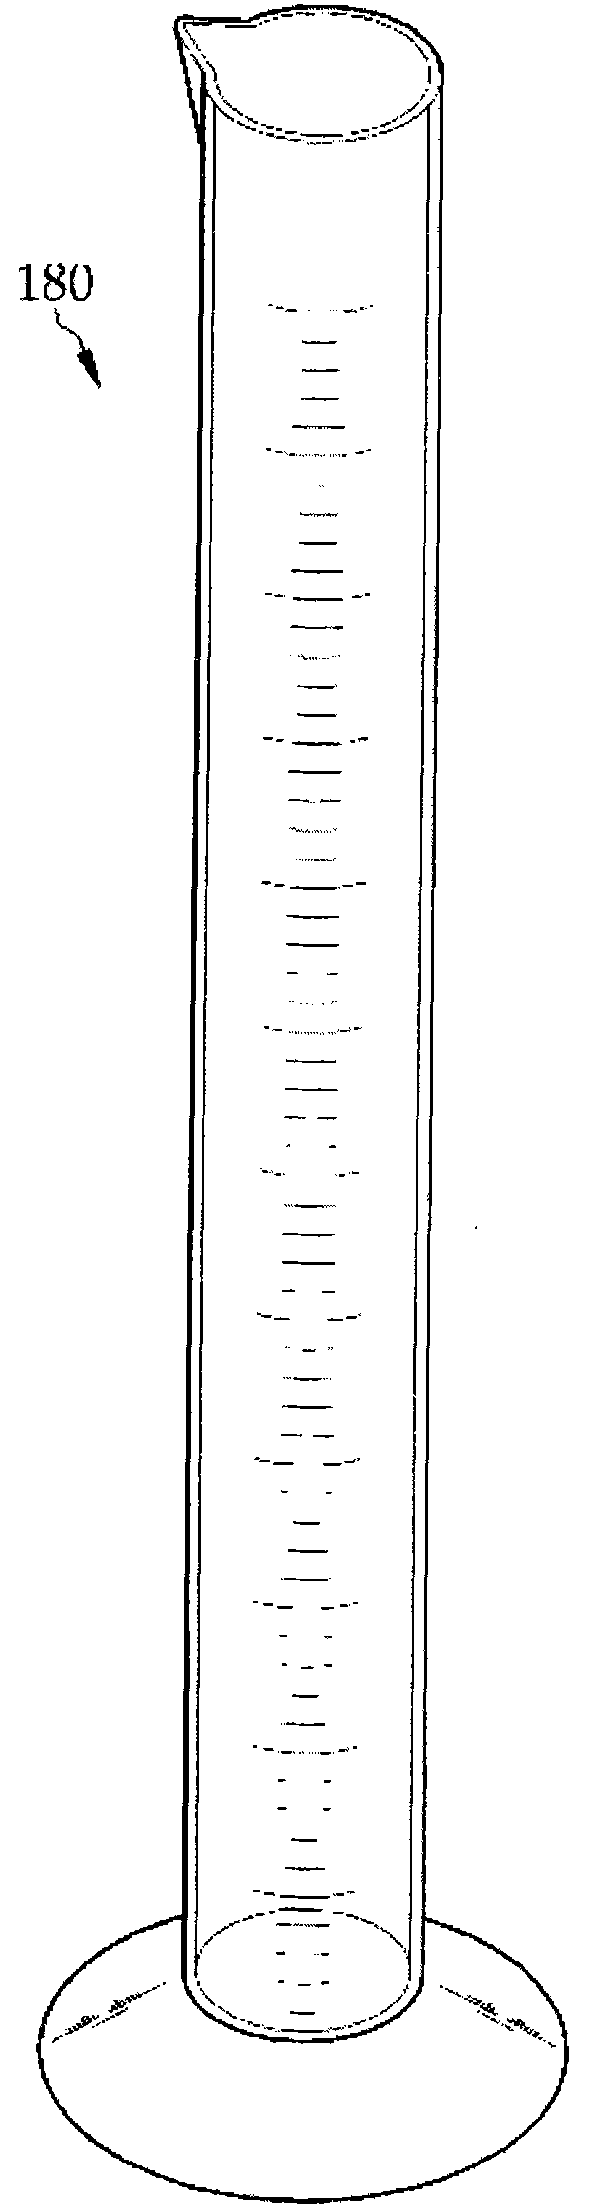 Apparatus for measuring fluid leakage from a valve using ultrasonic wave, sound, and temperature variations, and method for measuring fluid leakage using same